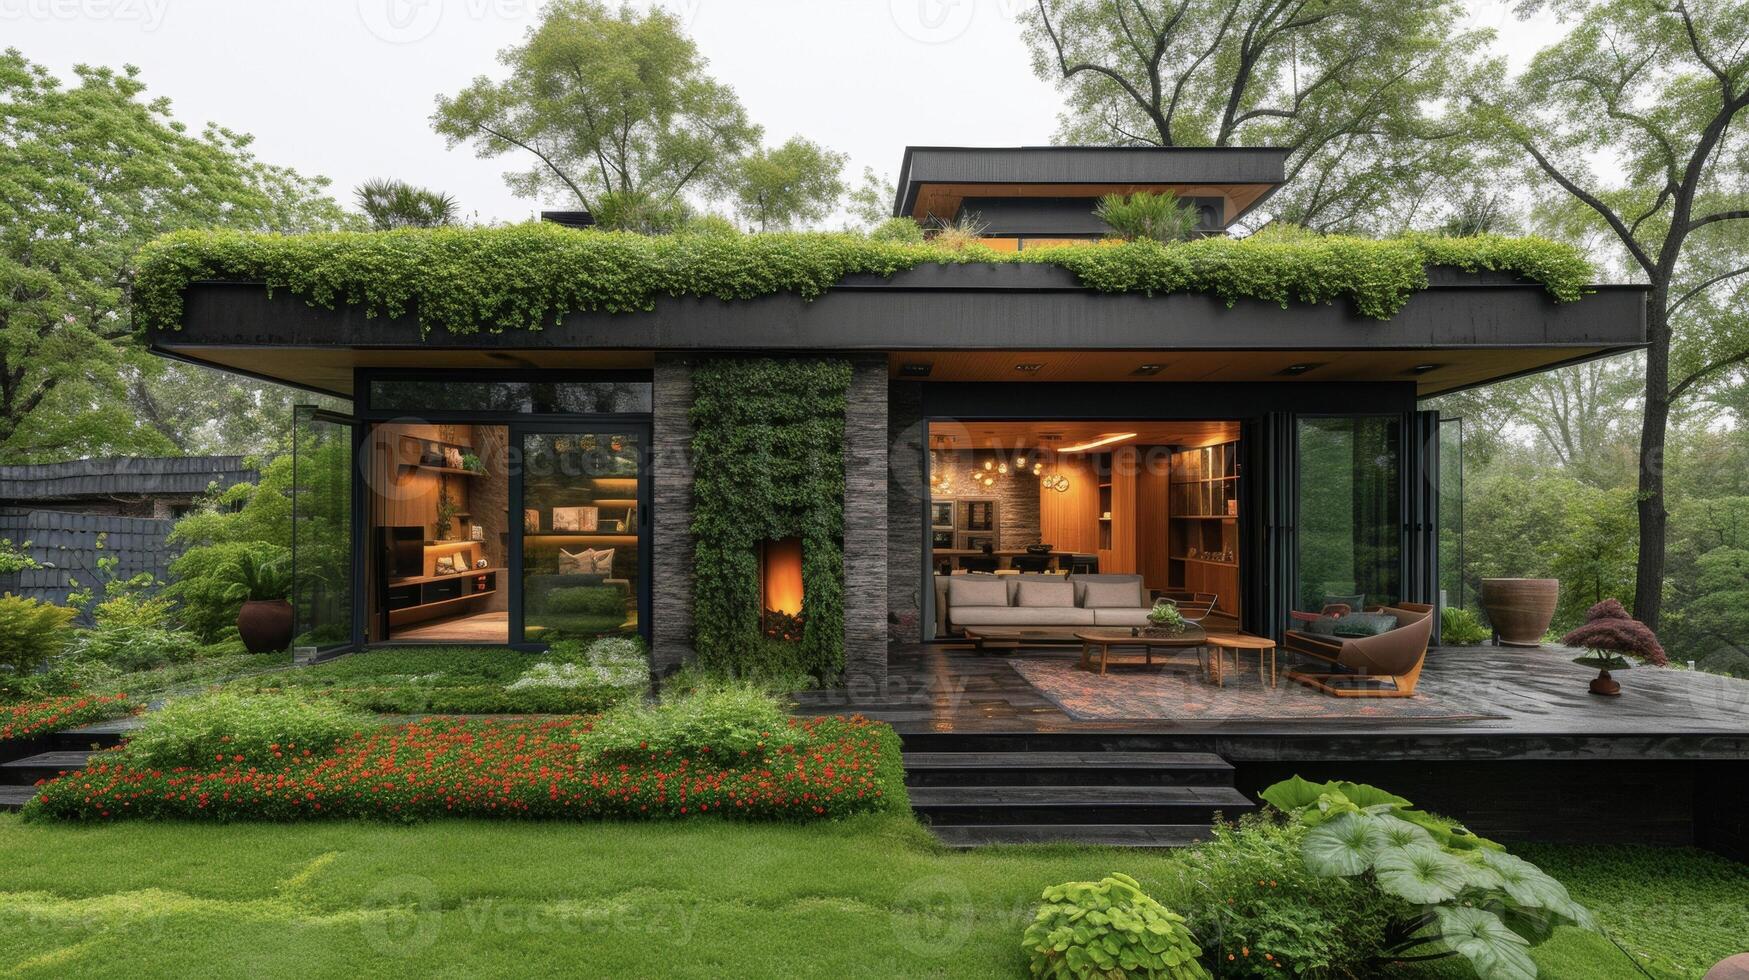 An ecofriendly home is showcased with the addition of a green roof system providing not only a beautiful outdoor space but also reducing stormwater runoff and improving ai photo